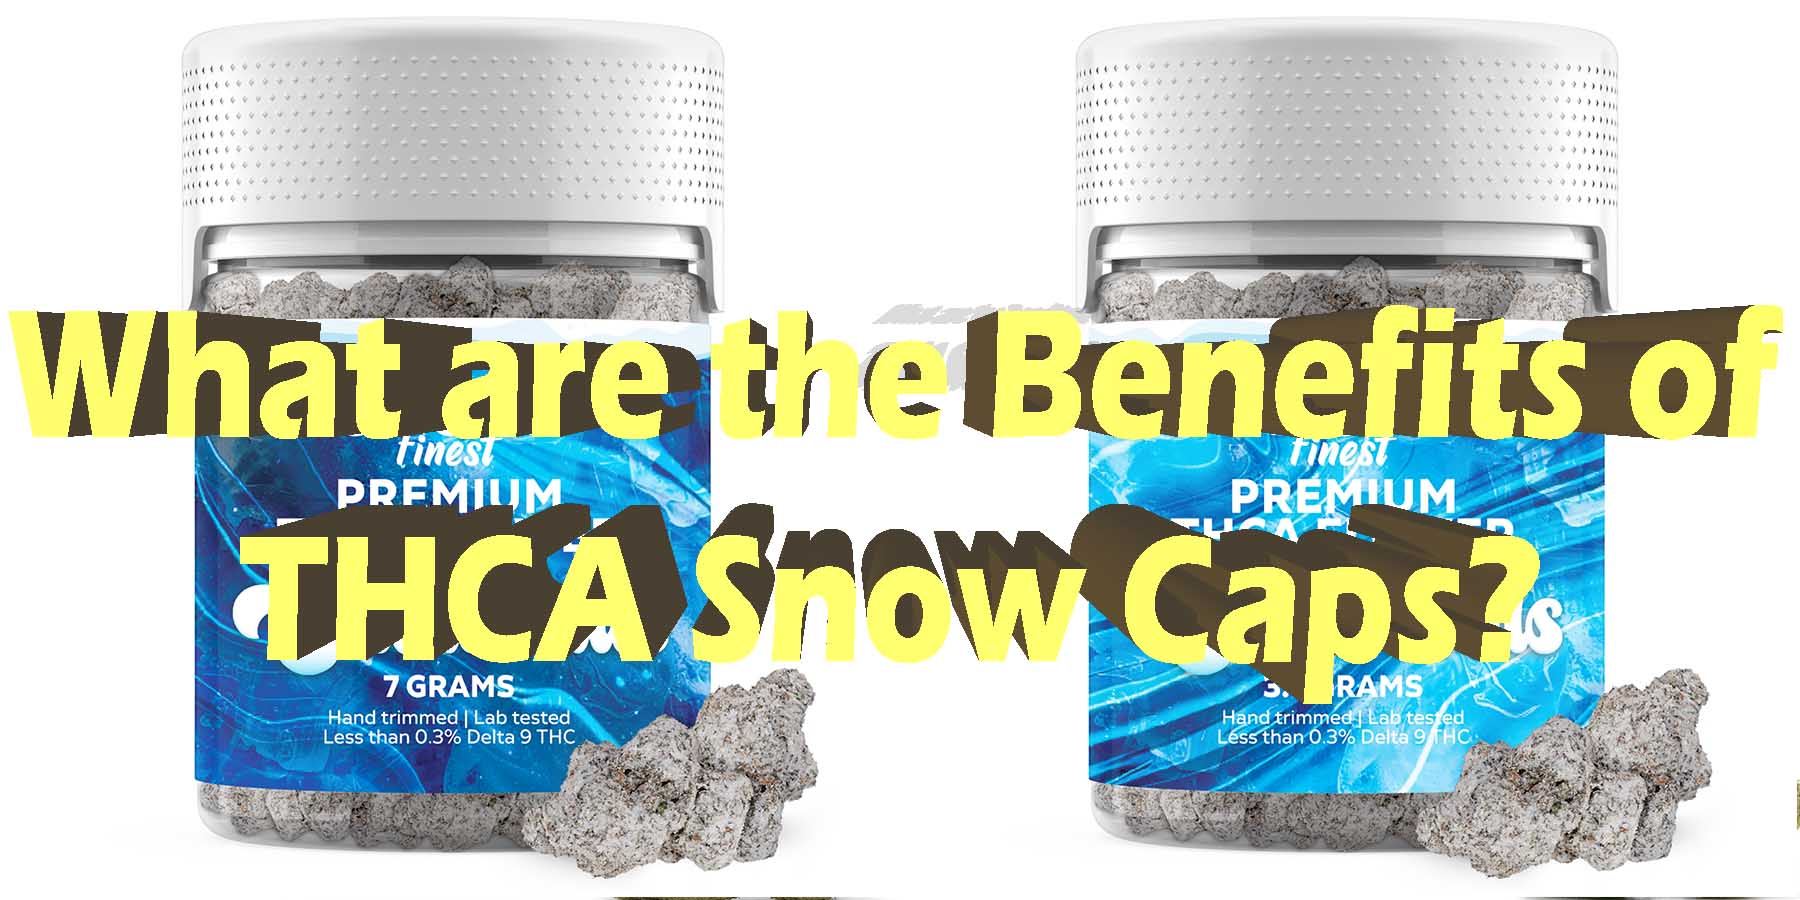 What are the Benefits of THCA Snow Caps Better LowestPrice Coupon Discount For Smoking Best High Smoke Shop Online Near Me THC THCA Best On The Market Bloomz